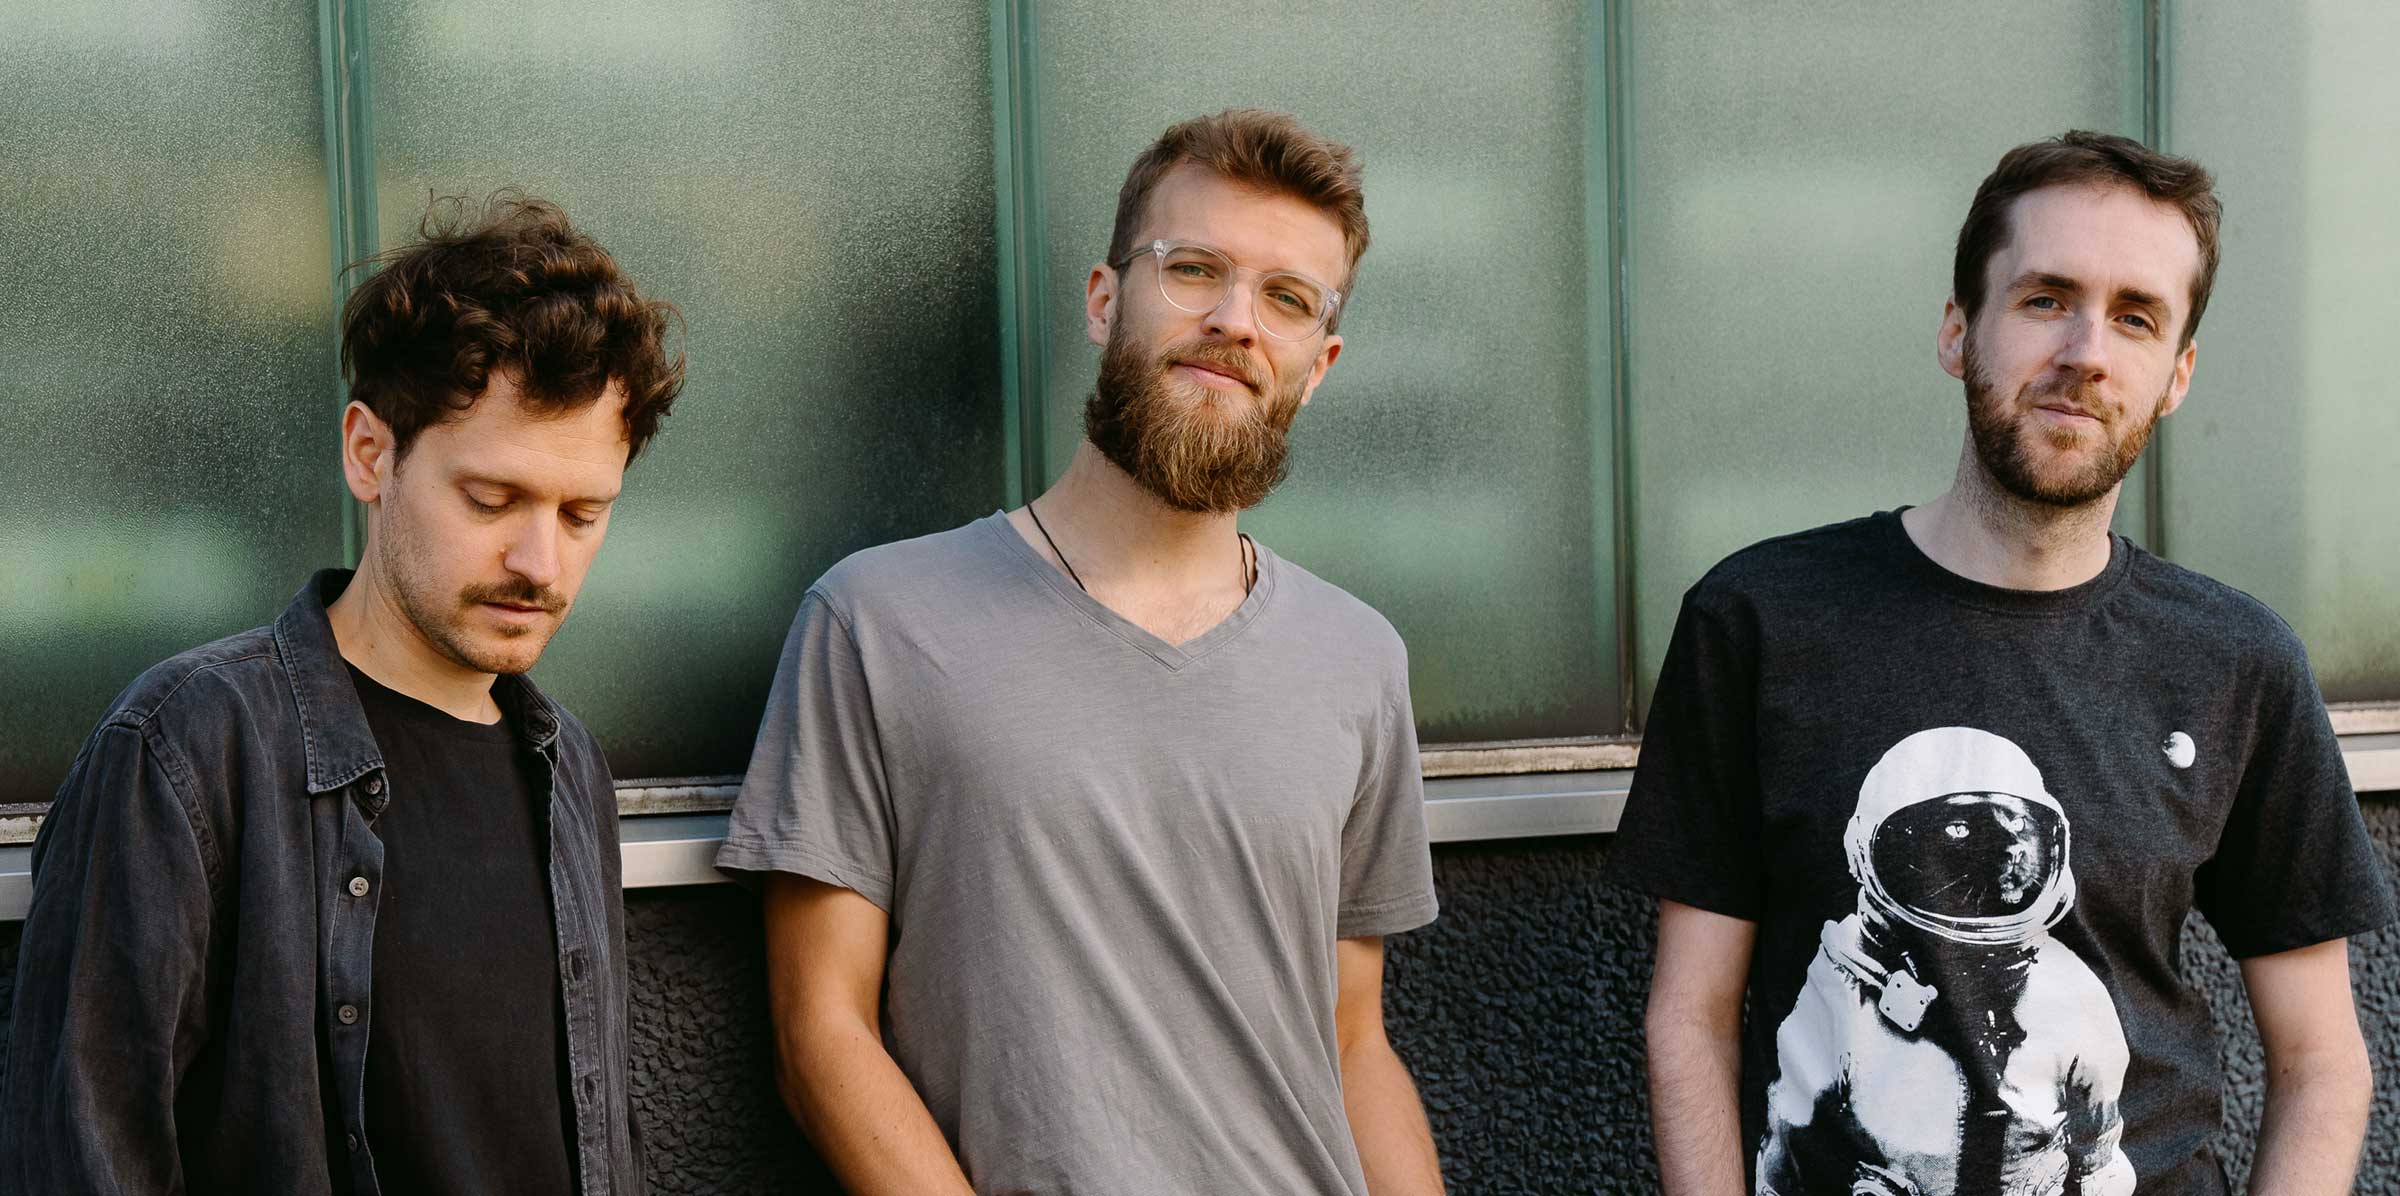 Official promotional picture for German Fusion Jazz Trio Cosmic Latte (Burkard Ruppaner - Drums, Tim Steiner - Bass, Ruben Roeh - Guitar). Picture by Alex Bach